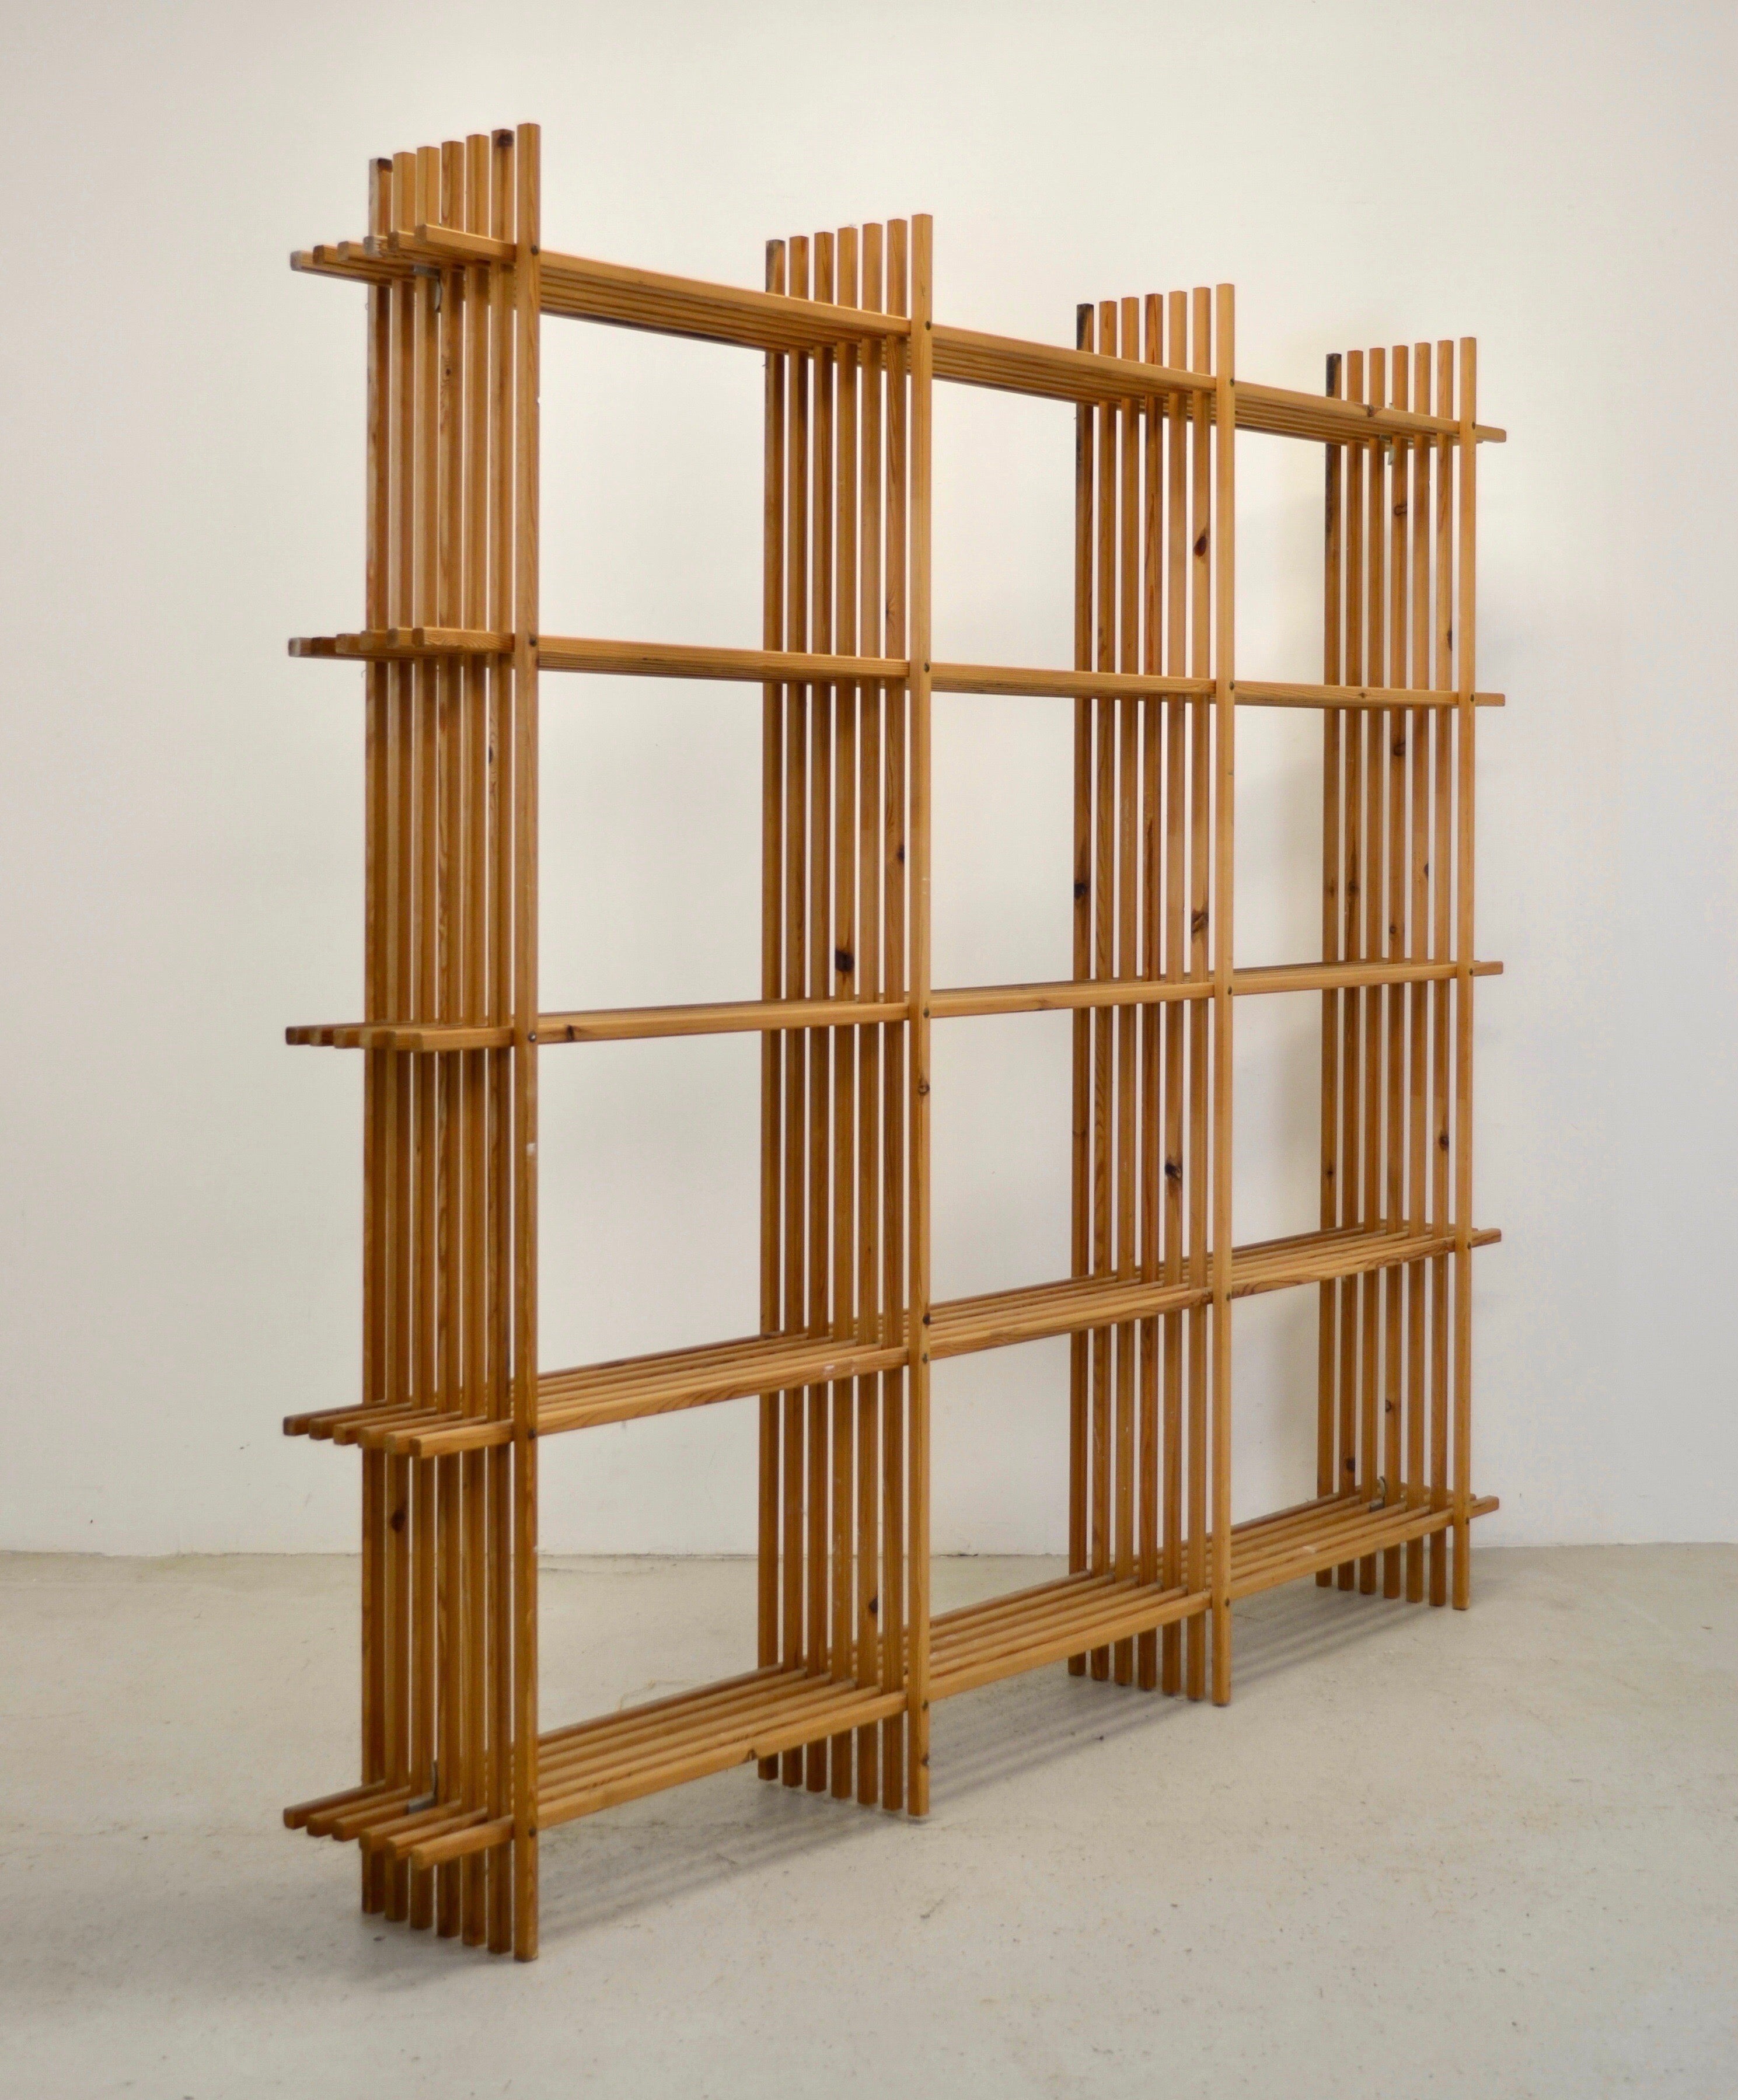 A bookcase or shelves designed in France in the 1960s in larch wood. They are distinguished by remarkable graphic work and striking visual lightness. The pieces are assembled using through rods and held in place by a clever metal system, as shown in